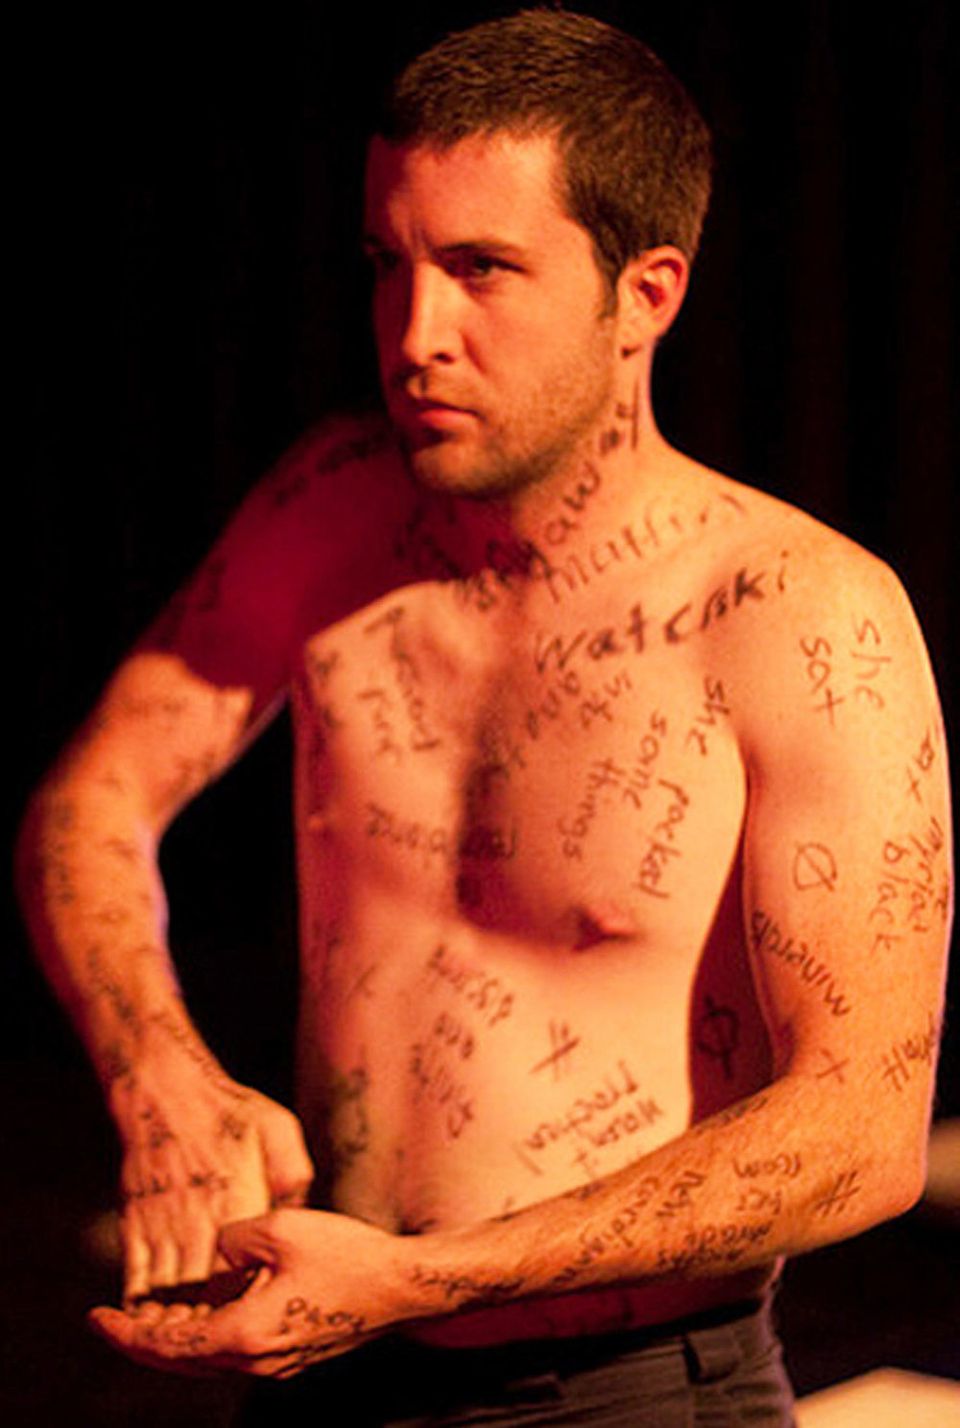 Shirtless man covered in writing, bends his fingers bakc